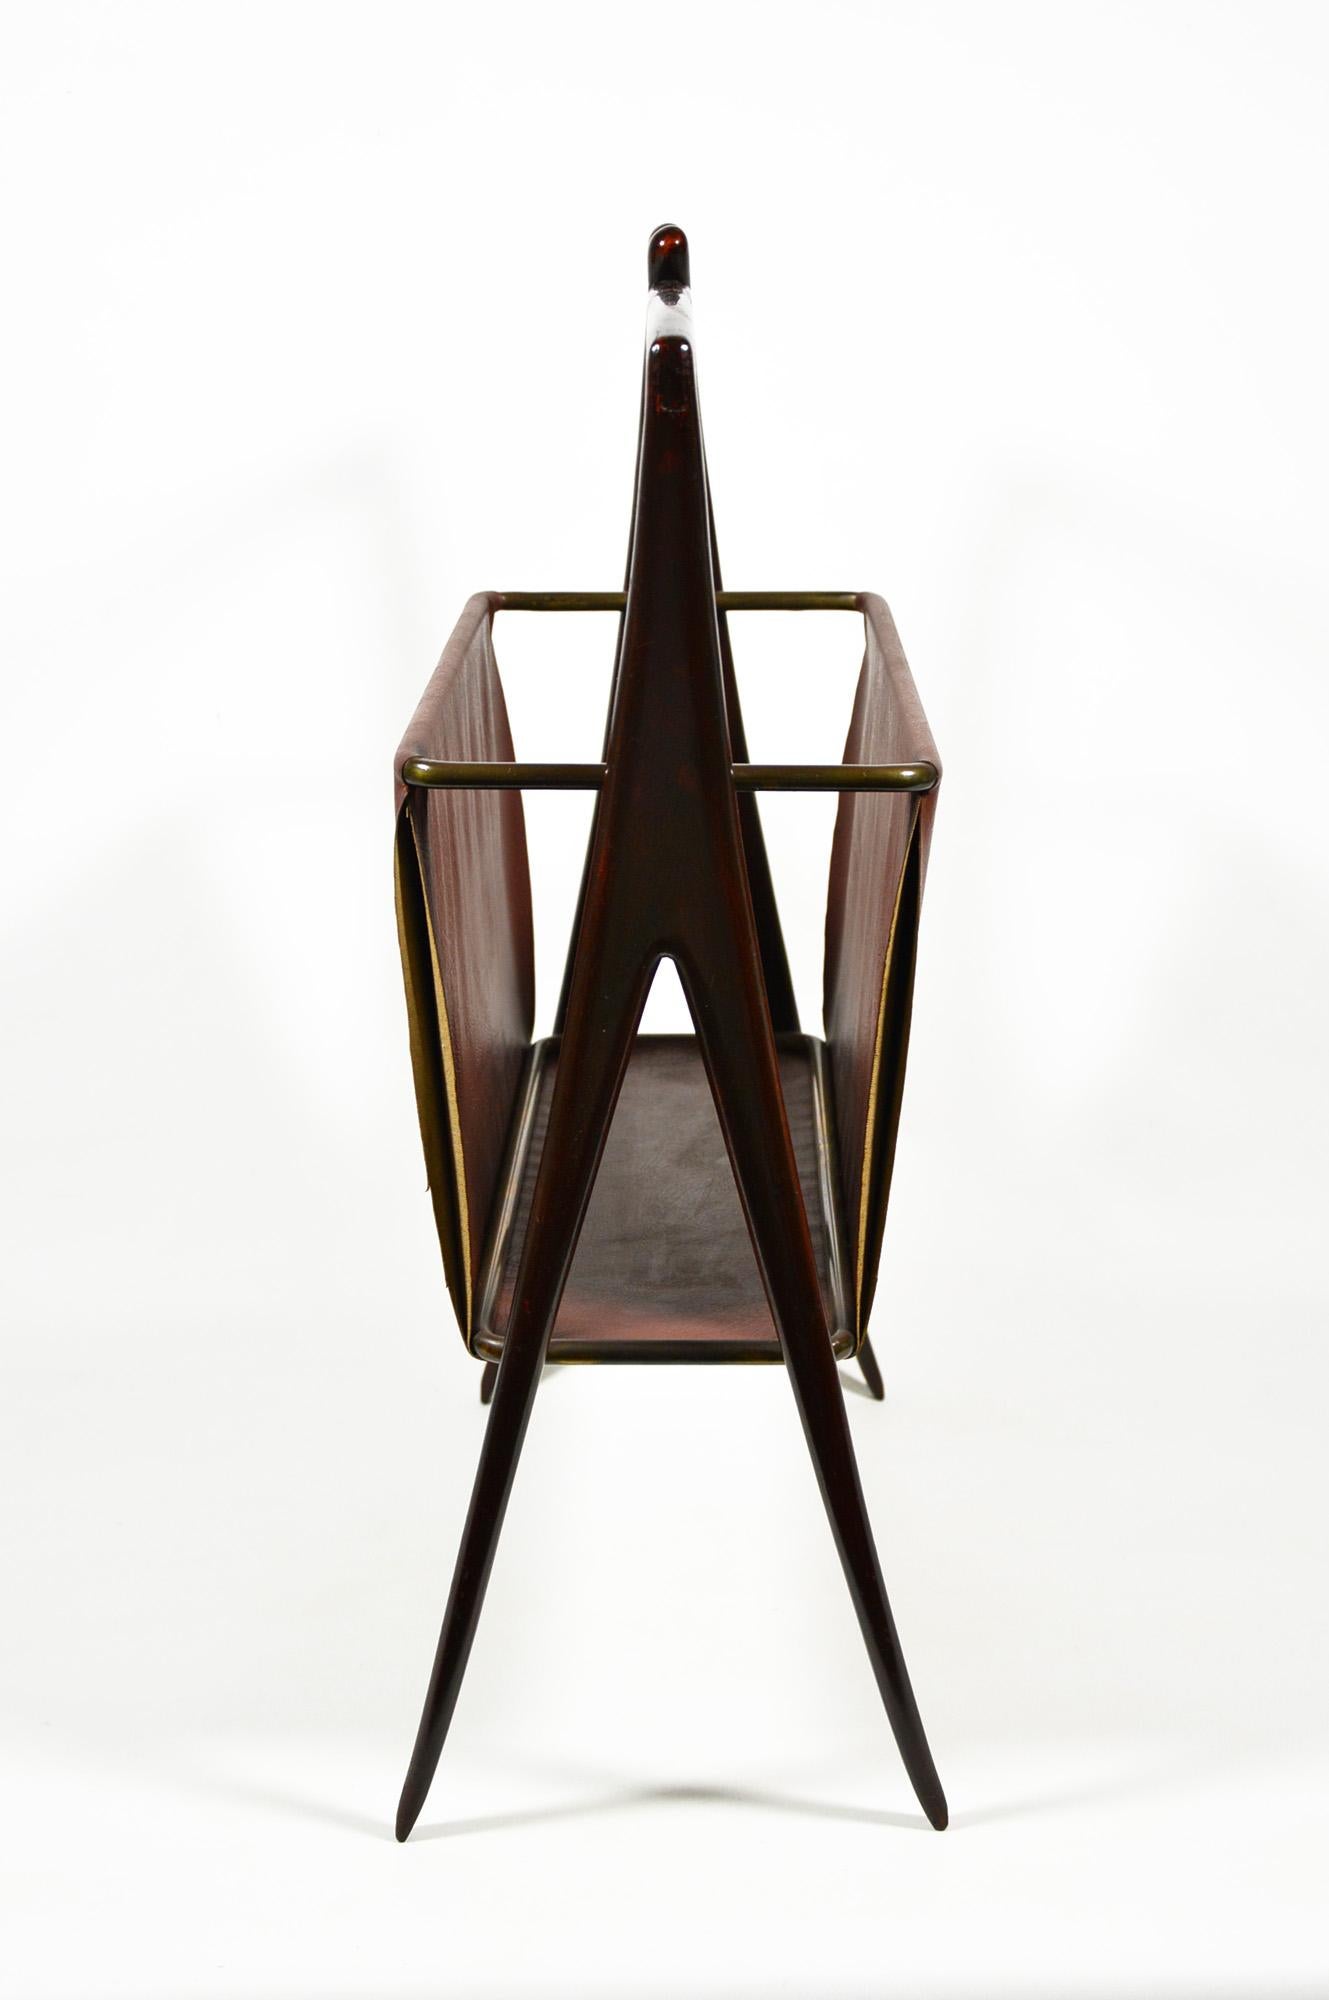 Italian midcentury magazine rack, made of mahogany, brass and faux leather, in good original condition.